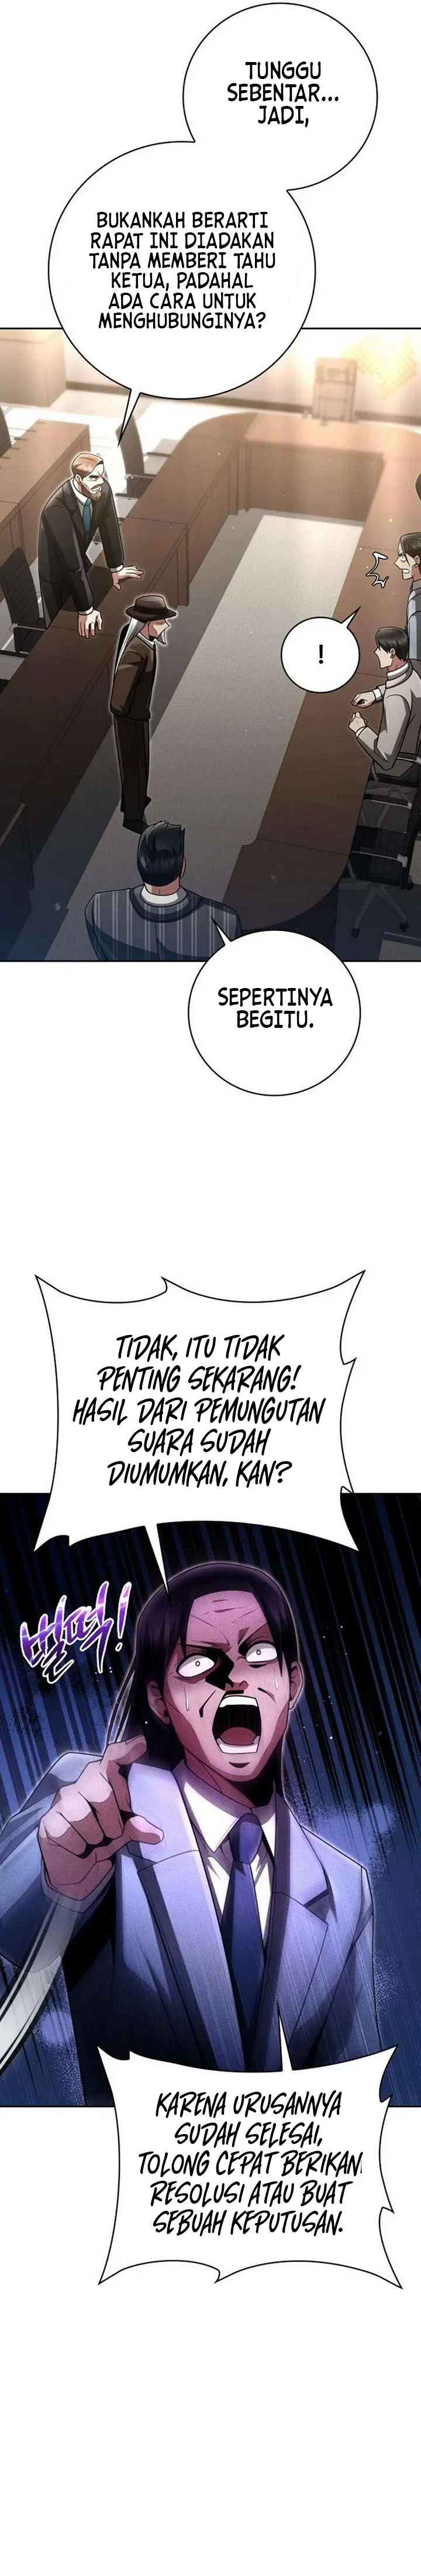 Dilarang COPAS - situs resmi www.mangacanblog.com - Komik clever cleaning life of the returned genius hunter 042 - chapter 42 43 Indonesia clever cleaning life of the returned genius hunter 042 - chapter 42 Terbaru 9|Baca Manga Komik Indonesia|Mangacan